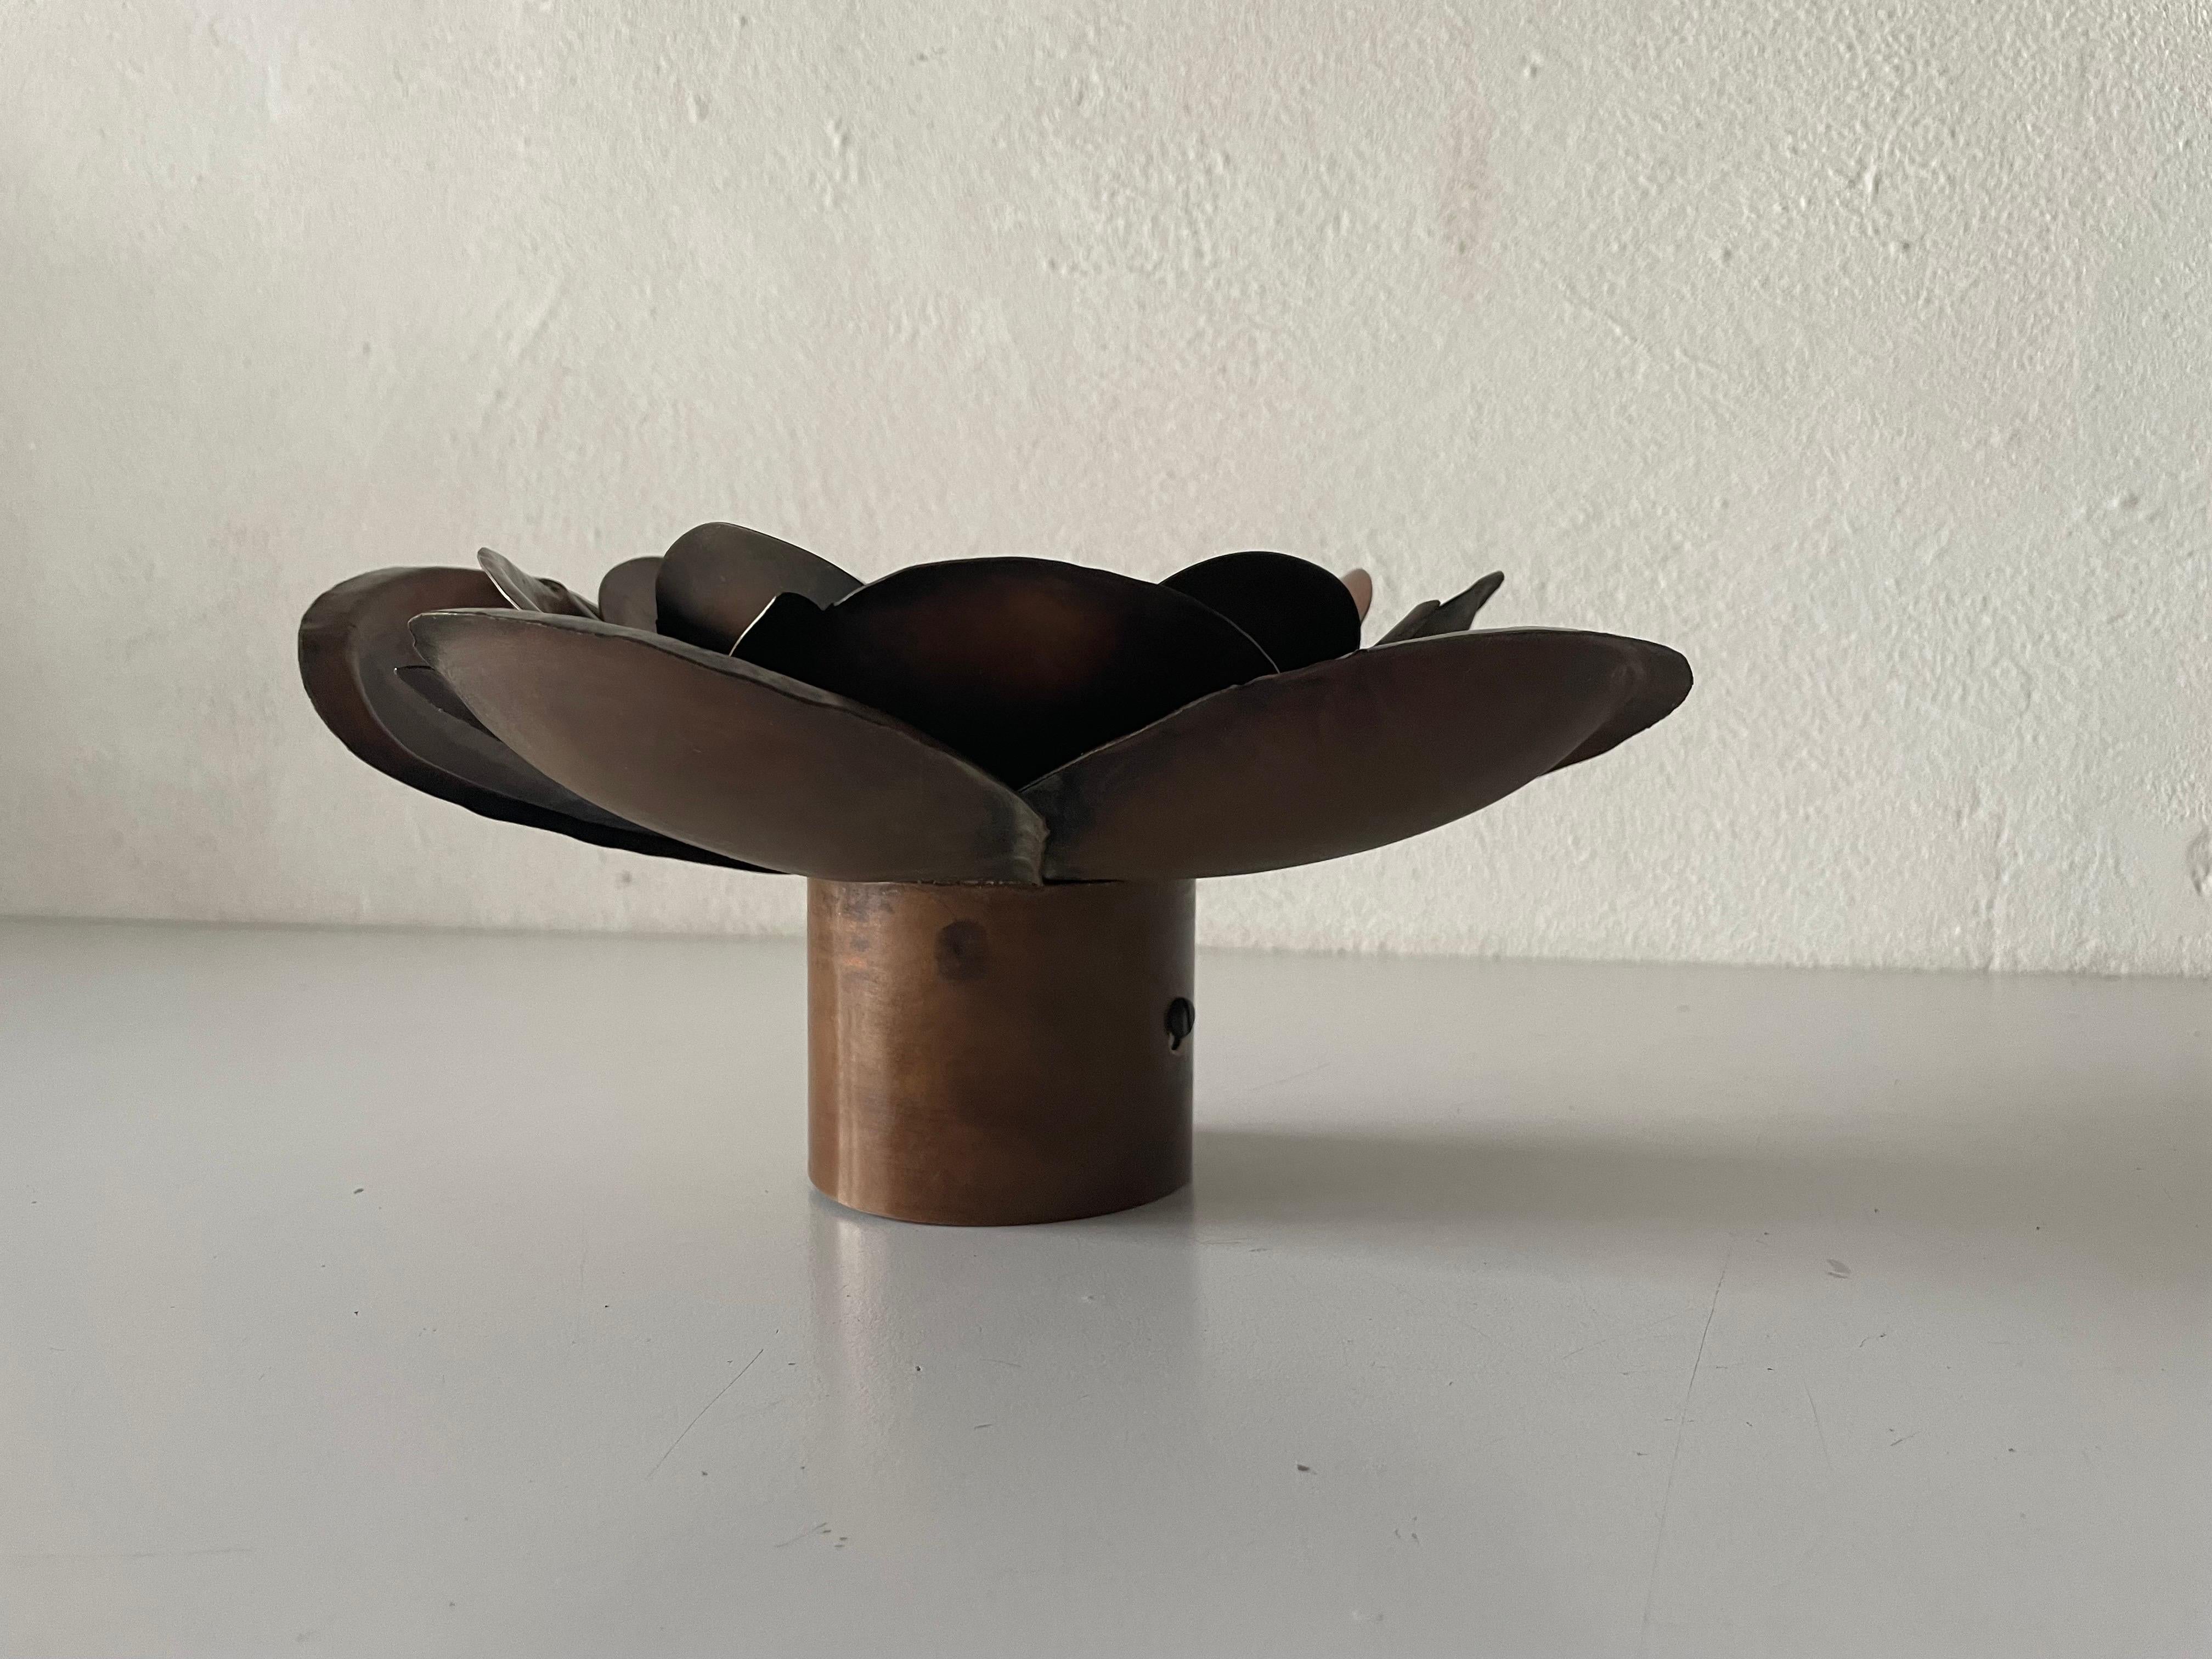 Flower design copper flush mount ceiling lamps, 1970s, Germany

Sculptural very elegant rare design flush mount. 

It is very ideal and suitable for all living areas.


Lamp is in good condition. No damage, no crack.
Wear consistent with age